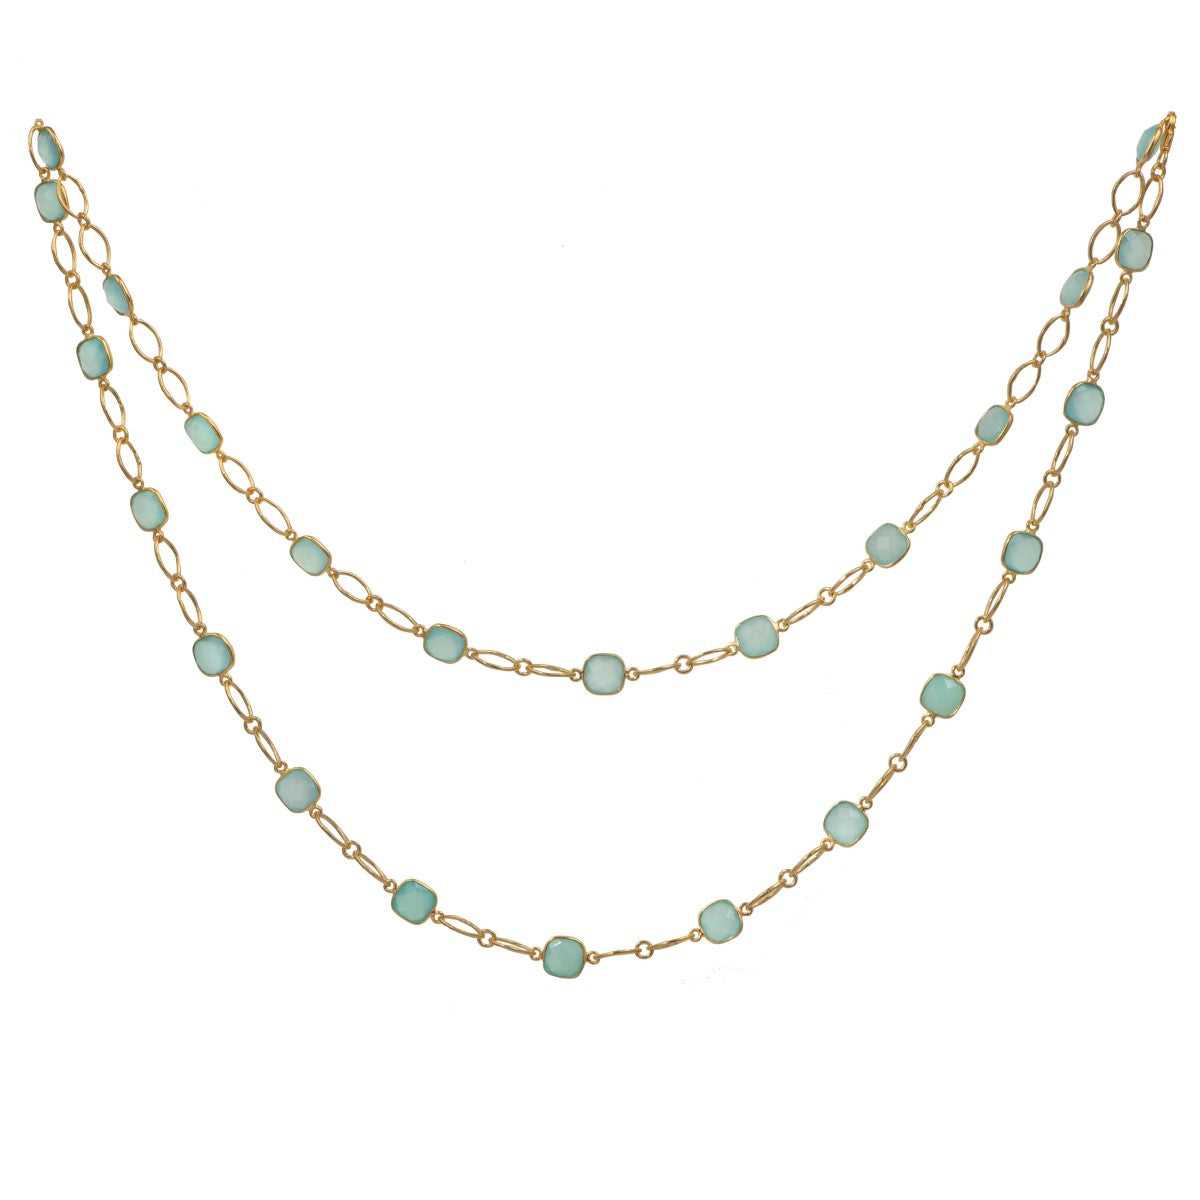 Aqua Chalcedony Gold Plated Sterling Silver Long Statement Necklace with Large Oval Links Chain